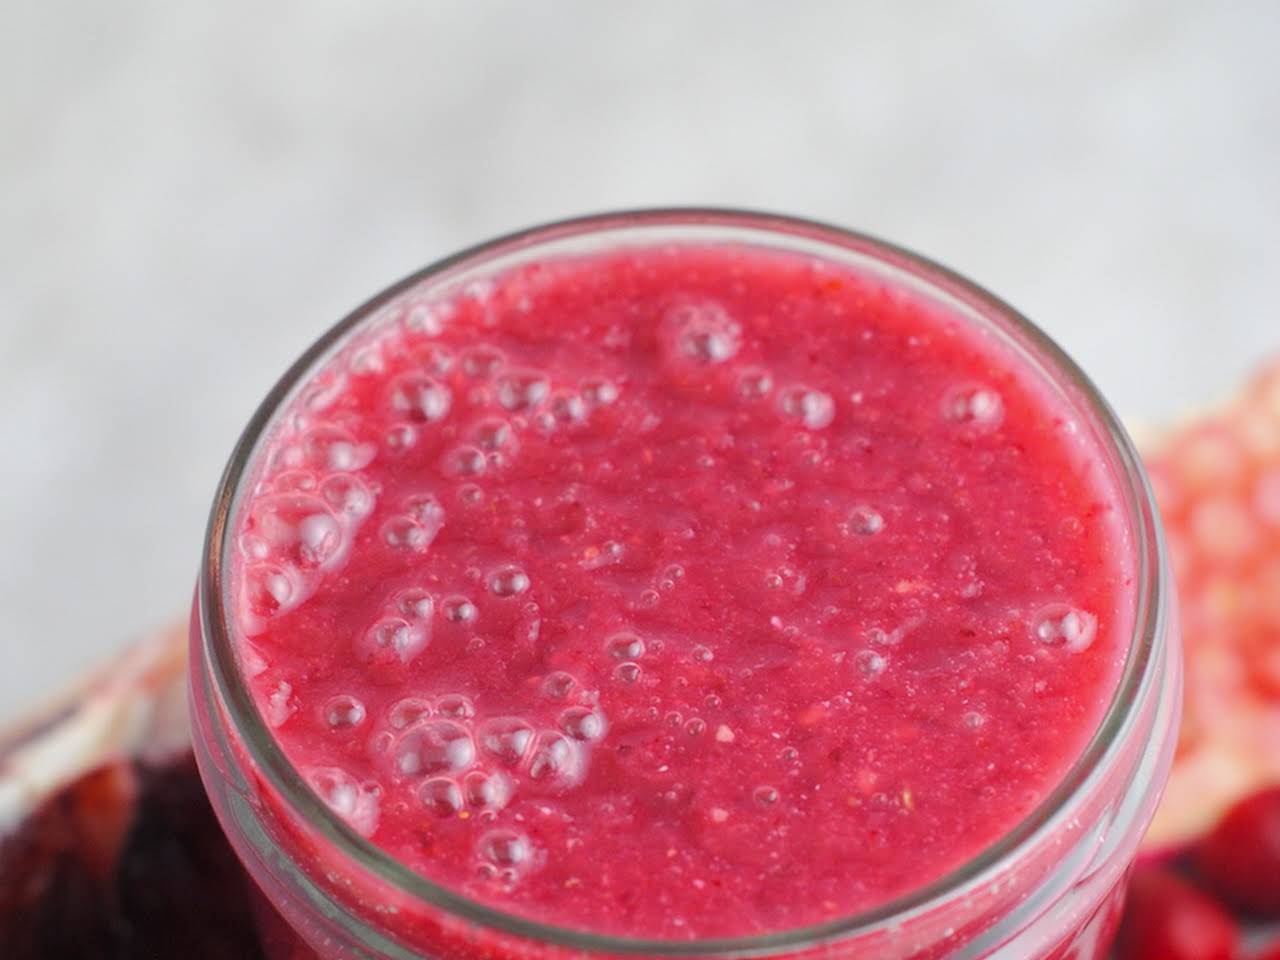 10 Best Red Fruit Smoothie Recipes | Yummly